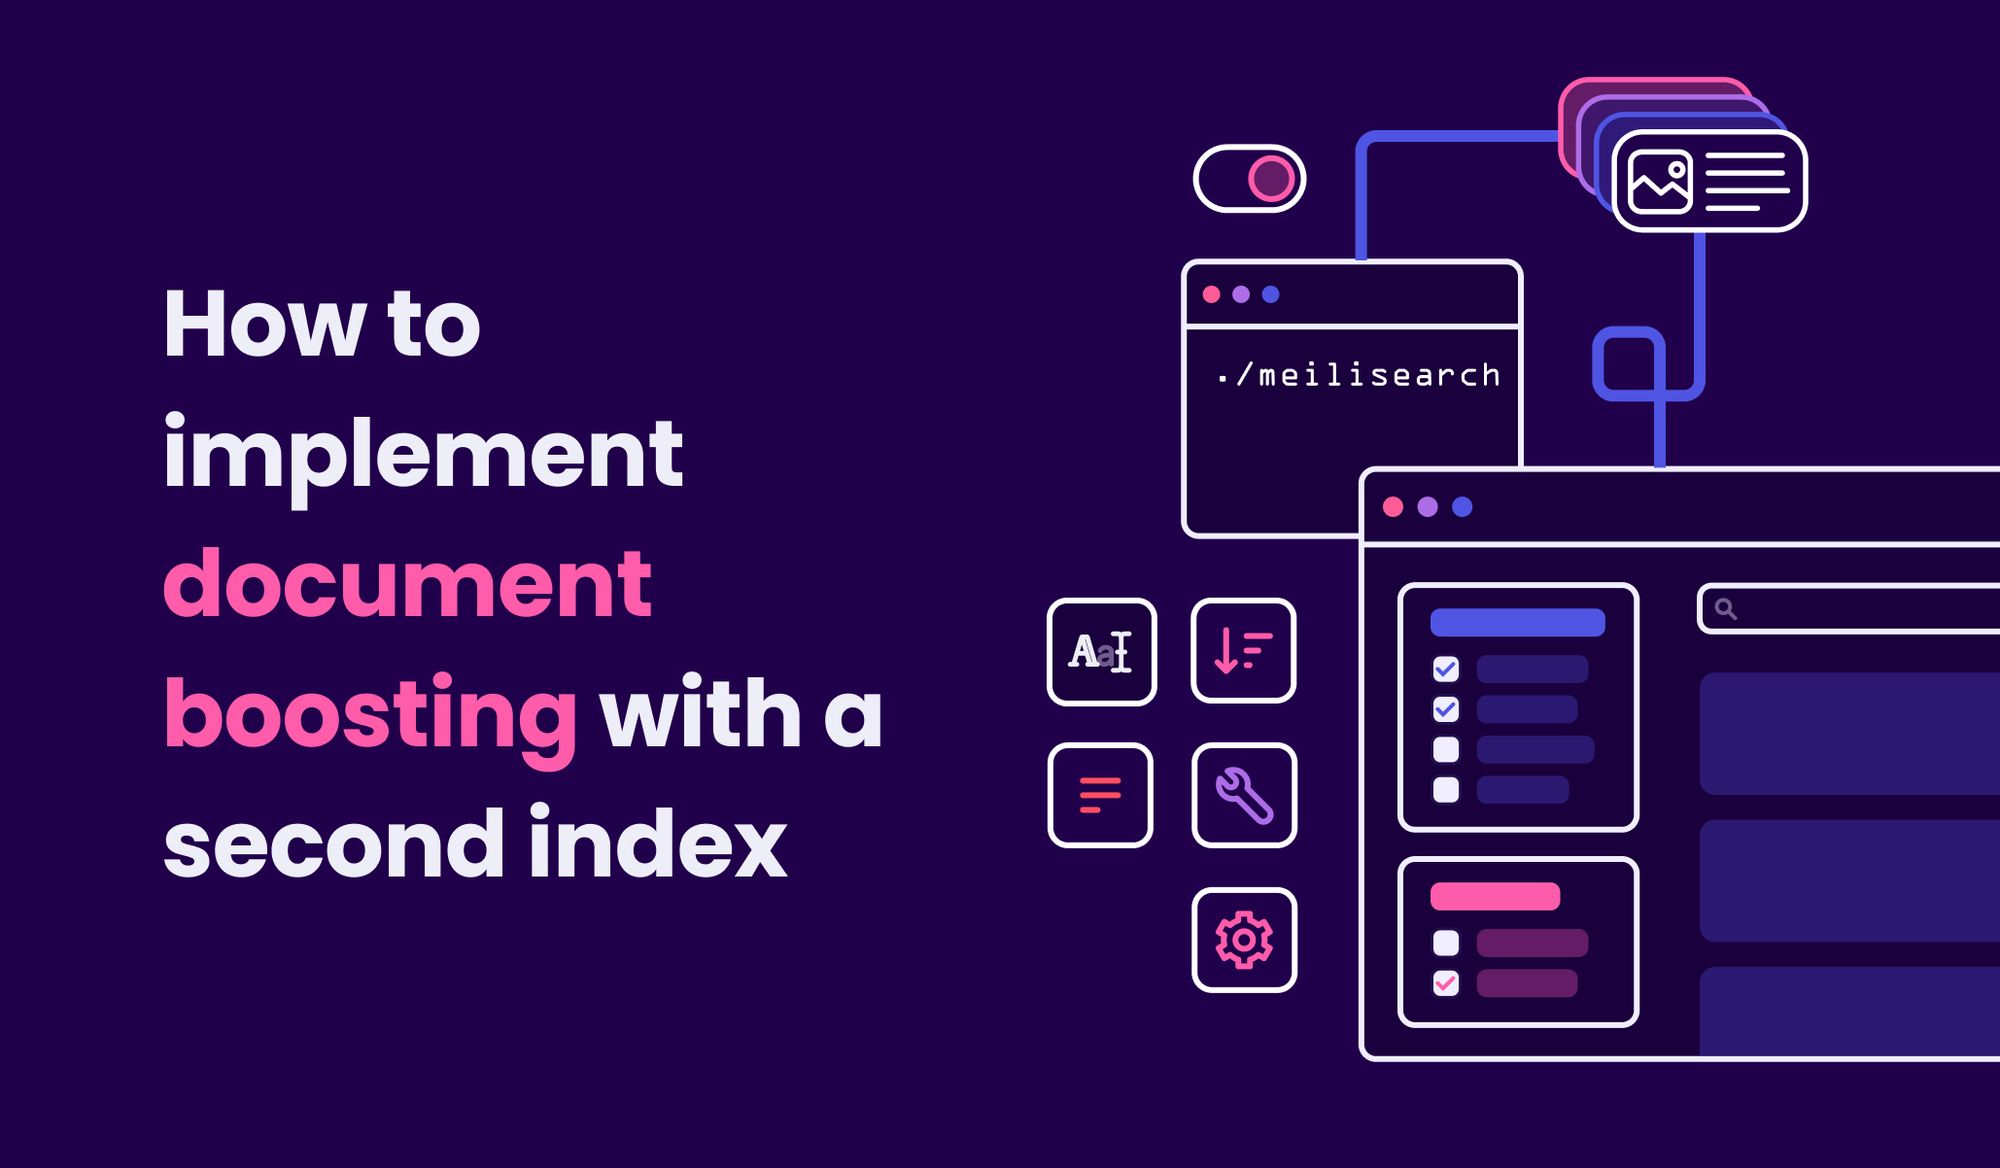 How to implement document boosting with a second index